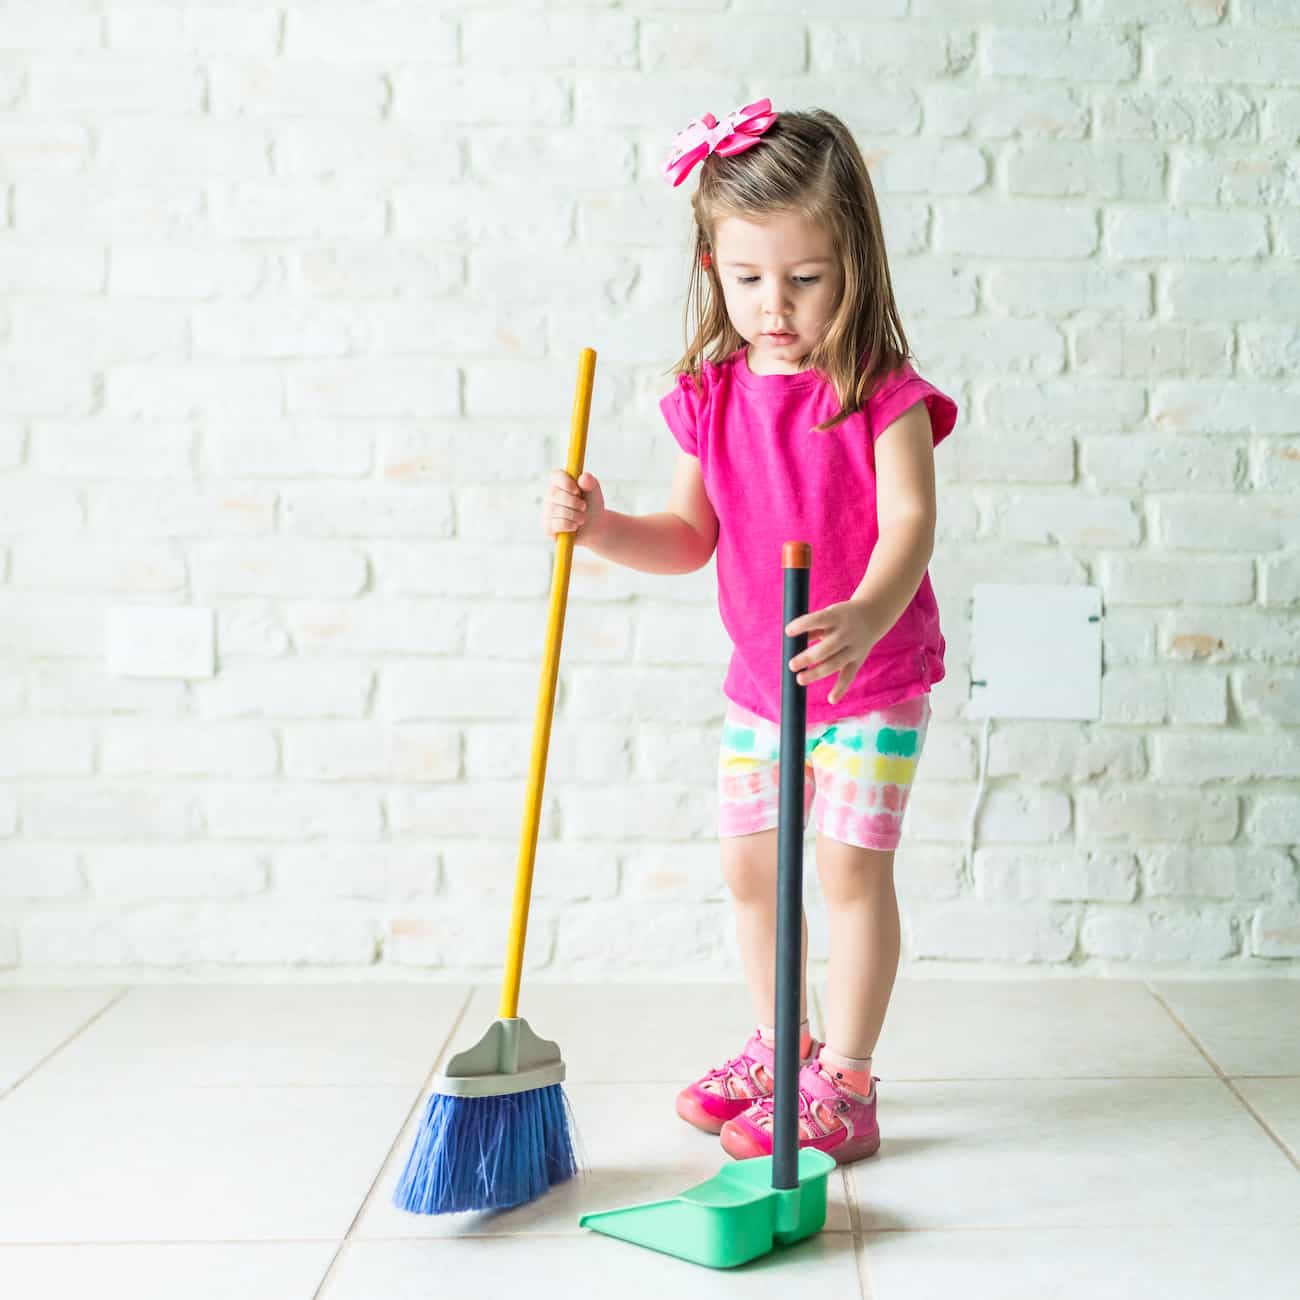 chores for kids - little girl wearing a pink shirt and sweeping